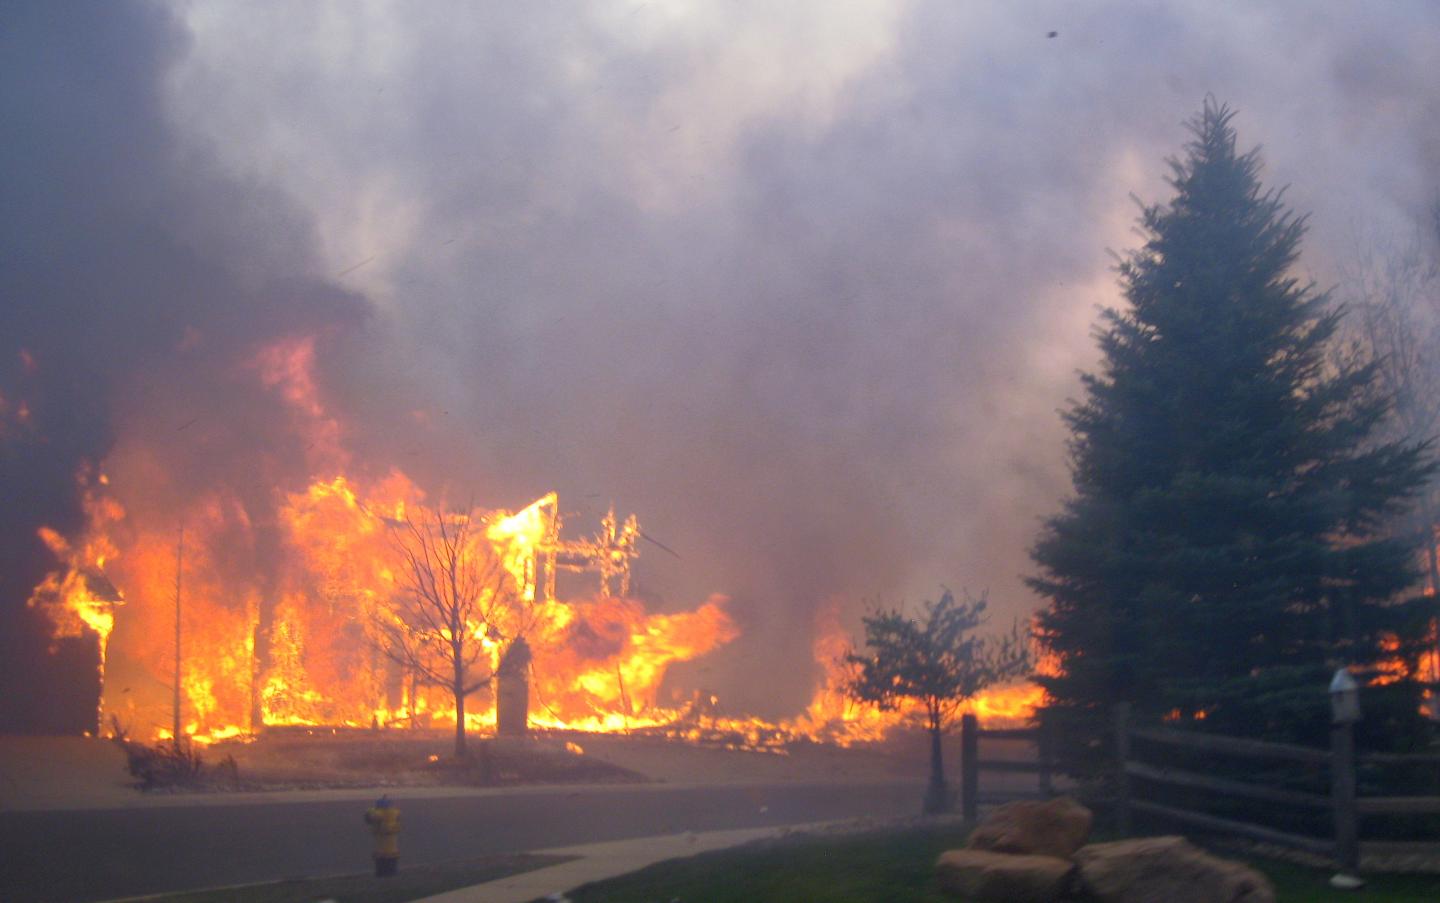 Structure-to-Structure Ignition During 2012 Colorado Wildfire